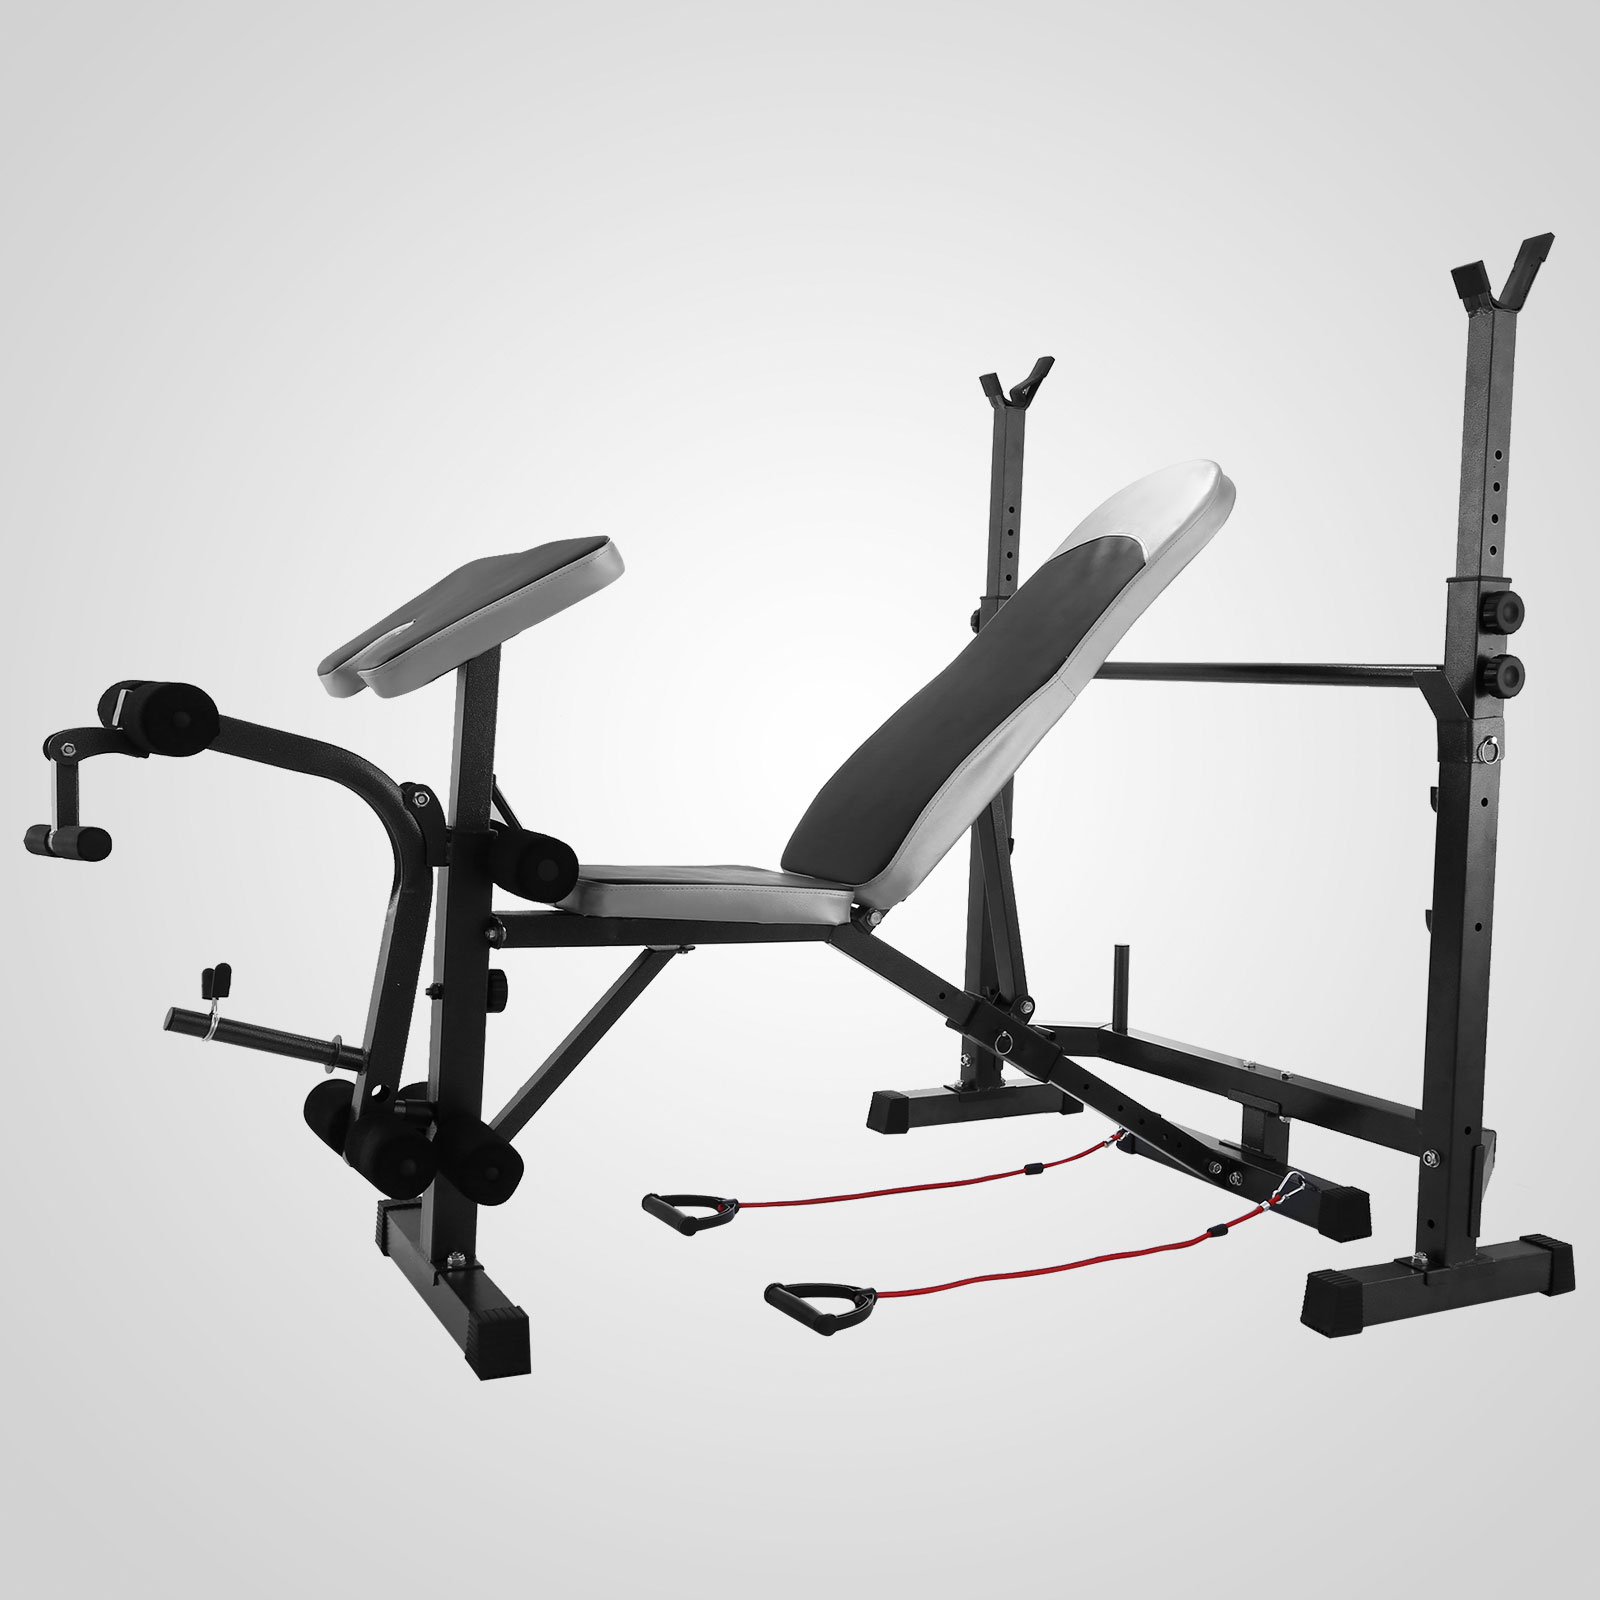 Weight Bench Set Home Gym Deluxe W/660Lbs Weights Lifting ...